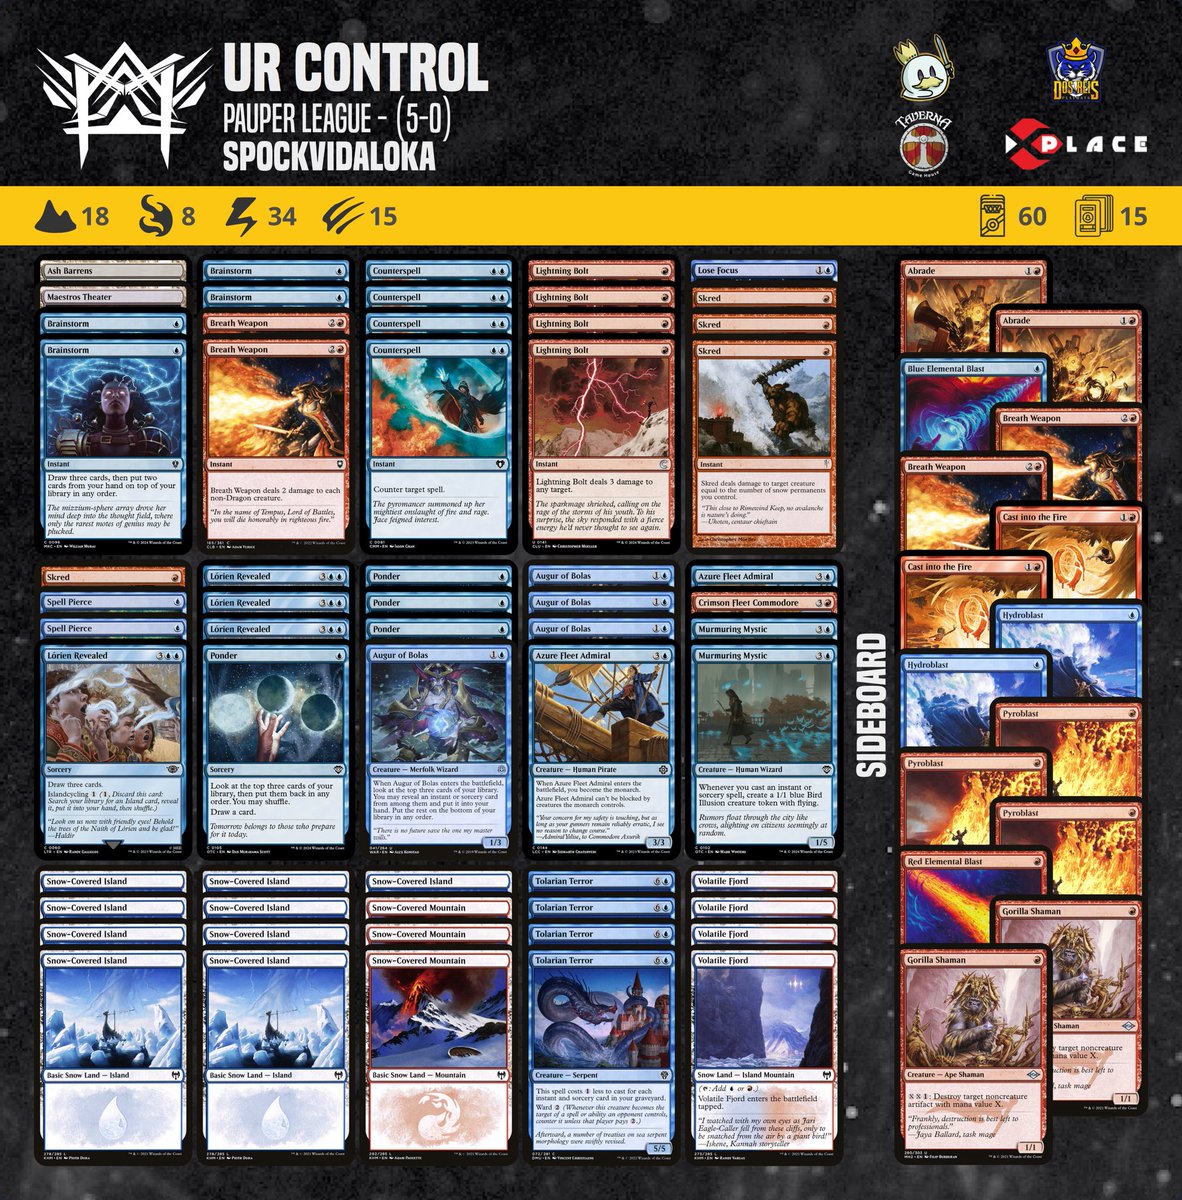 Our athlete @Vini_Spock achieved a 5-0 record in the Pauper League tournament with this UR Control decklist. #pauper #magic #mtgcommon #metagamepauper #mtgpauper #magicthegathering #wizardsofthecoast @PauperDecklists @fireshoes